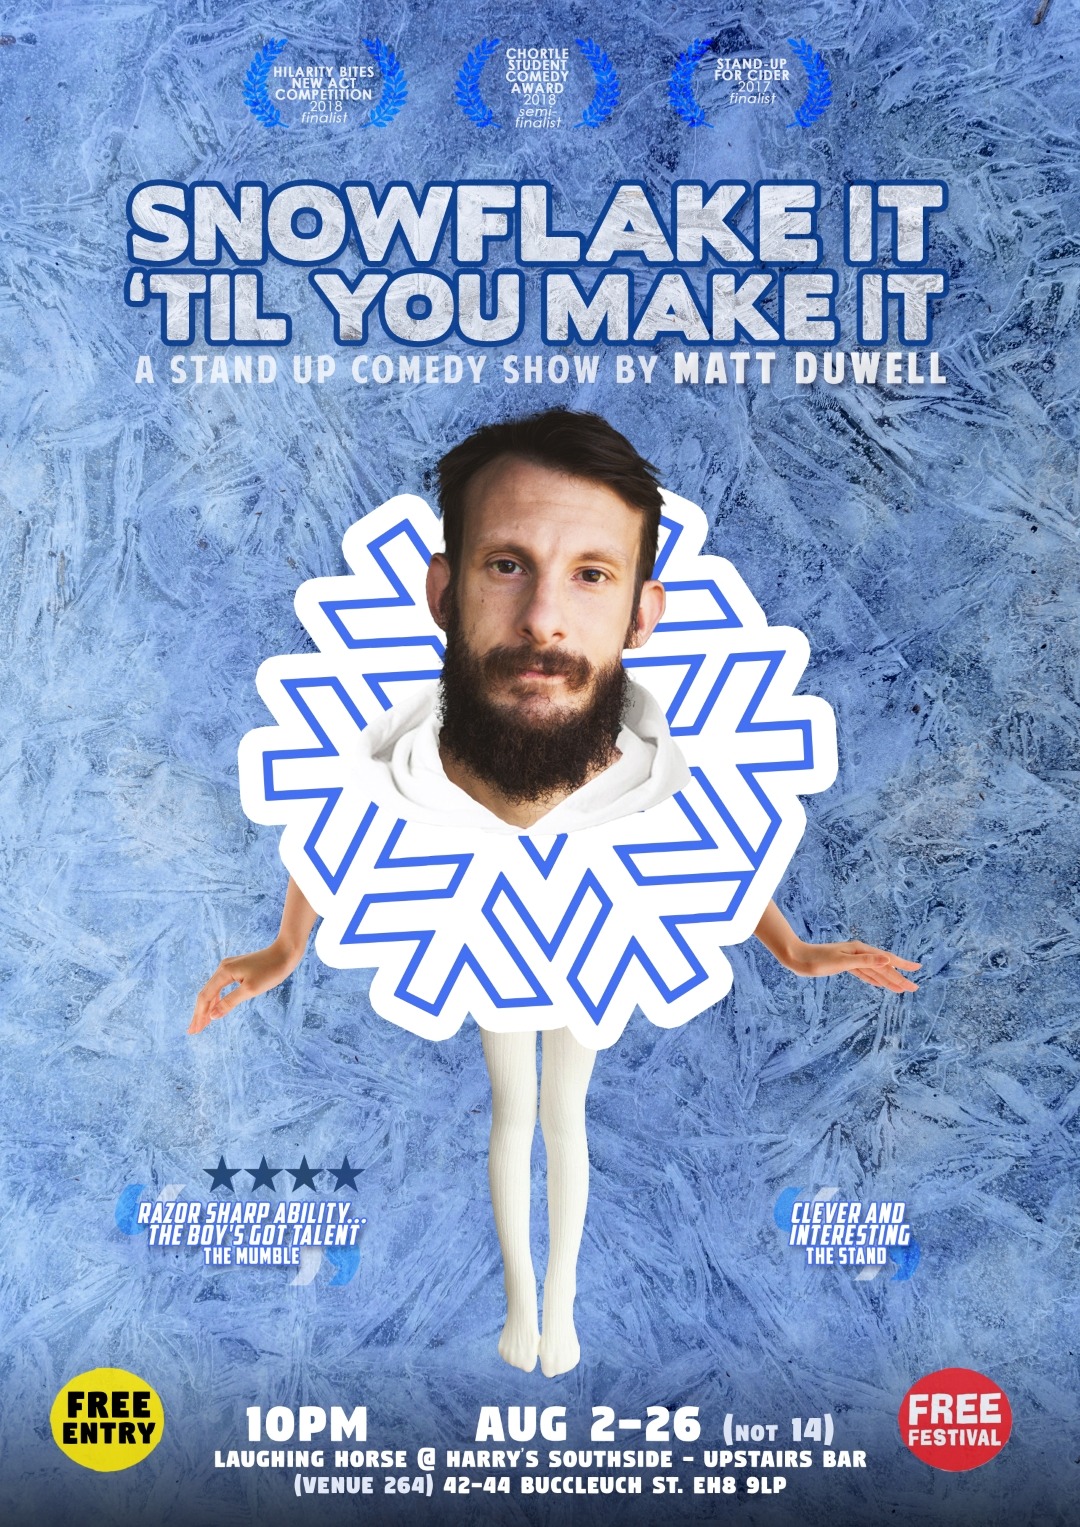 The poster for Snowflake It 'Til You Make It